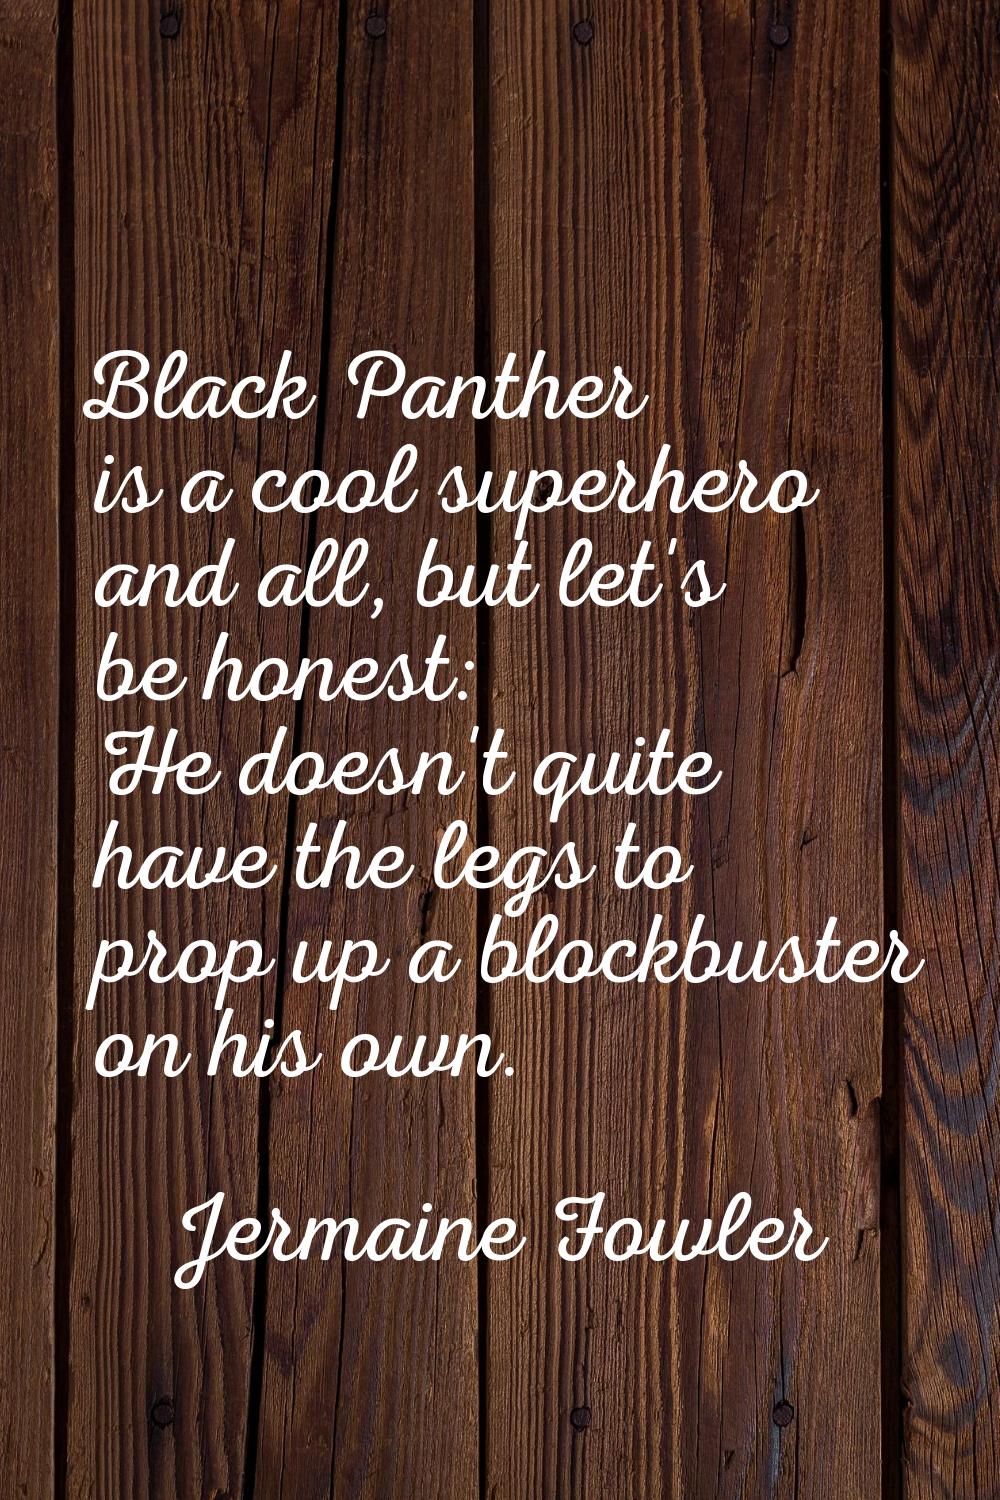 Black Panther is a cool superhero and all, but let's be honest: He doesn't quite have the legs to p